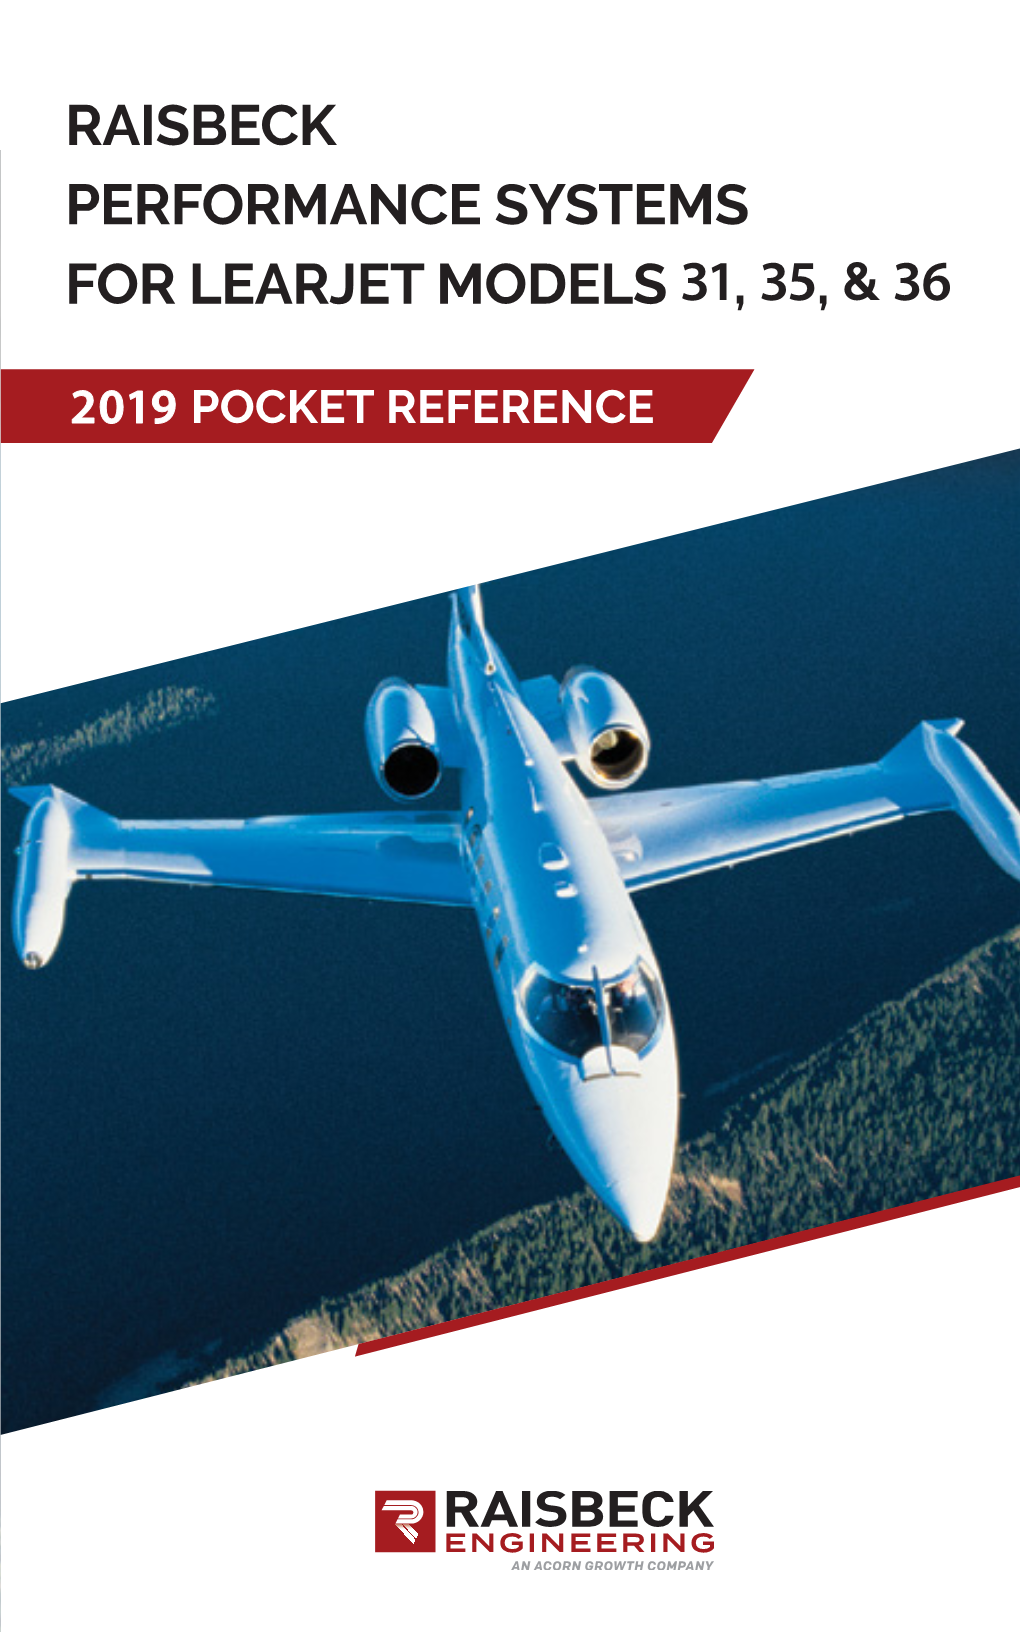 Raisbeck Performance Systems for Learjet Models 31, 35, & 36